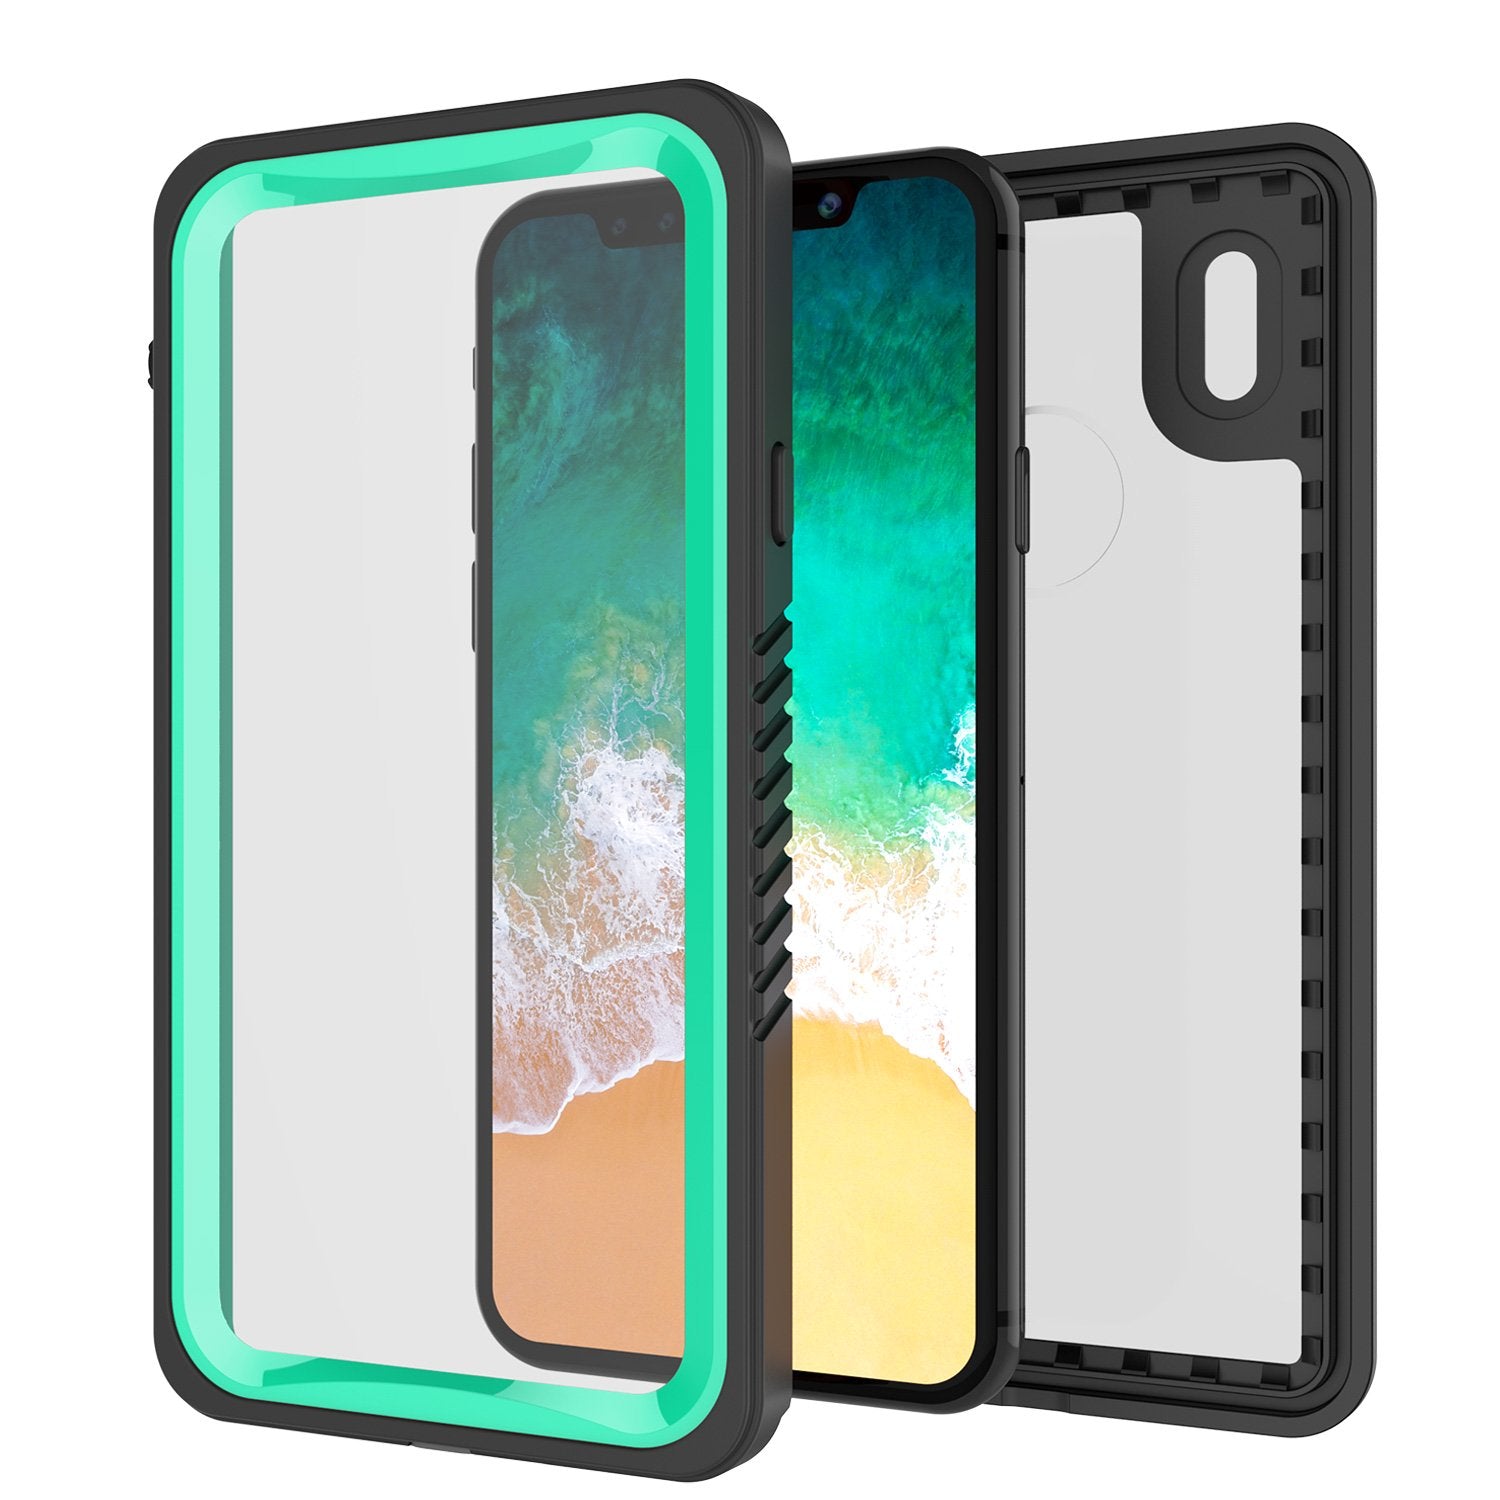 iPhone X Case, Punkcase [Extreme Series] [Slim Fit] [IP68 Certified] [Teal] - PunkCase NZ